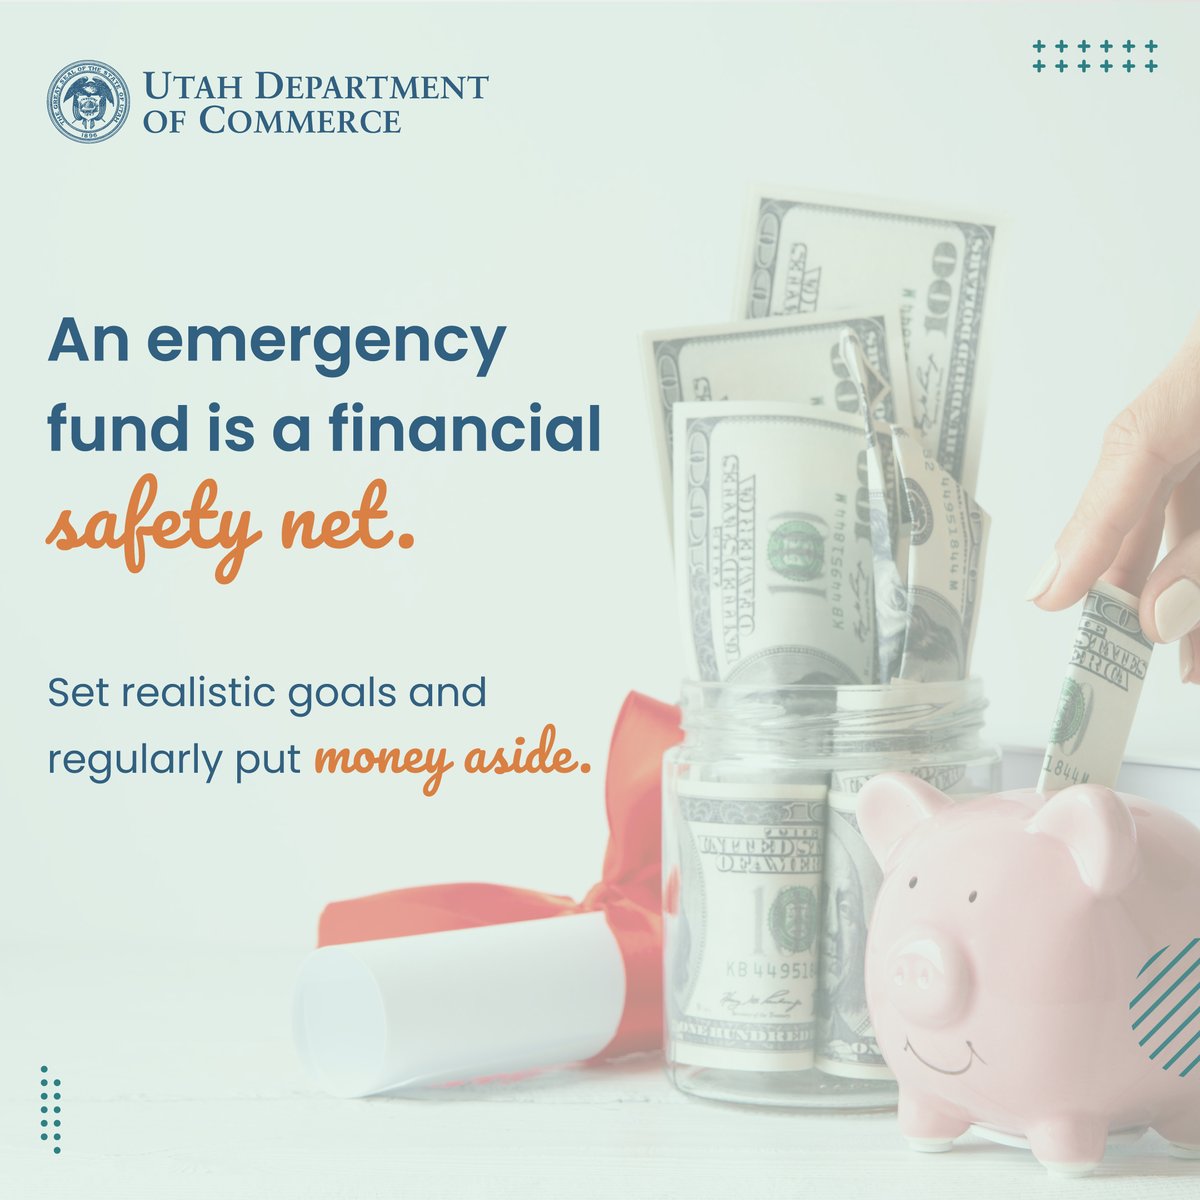 Do you have an emergency fund? Set aside three to six months of living expenses in an easily accessible account. This gives you a cushion if you suddenly have medical bills or become unemployed. Learn how to create an emergency fund: finra.org/investors/pers…